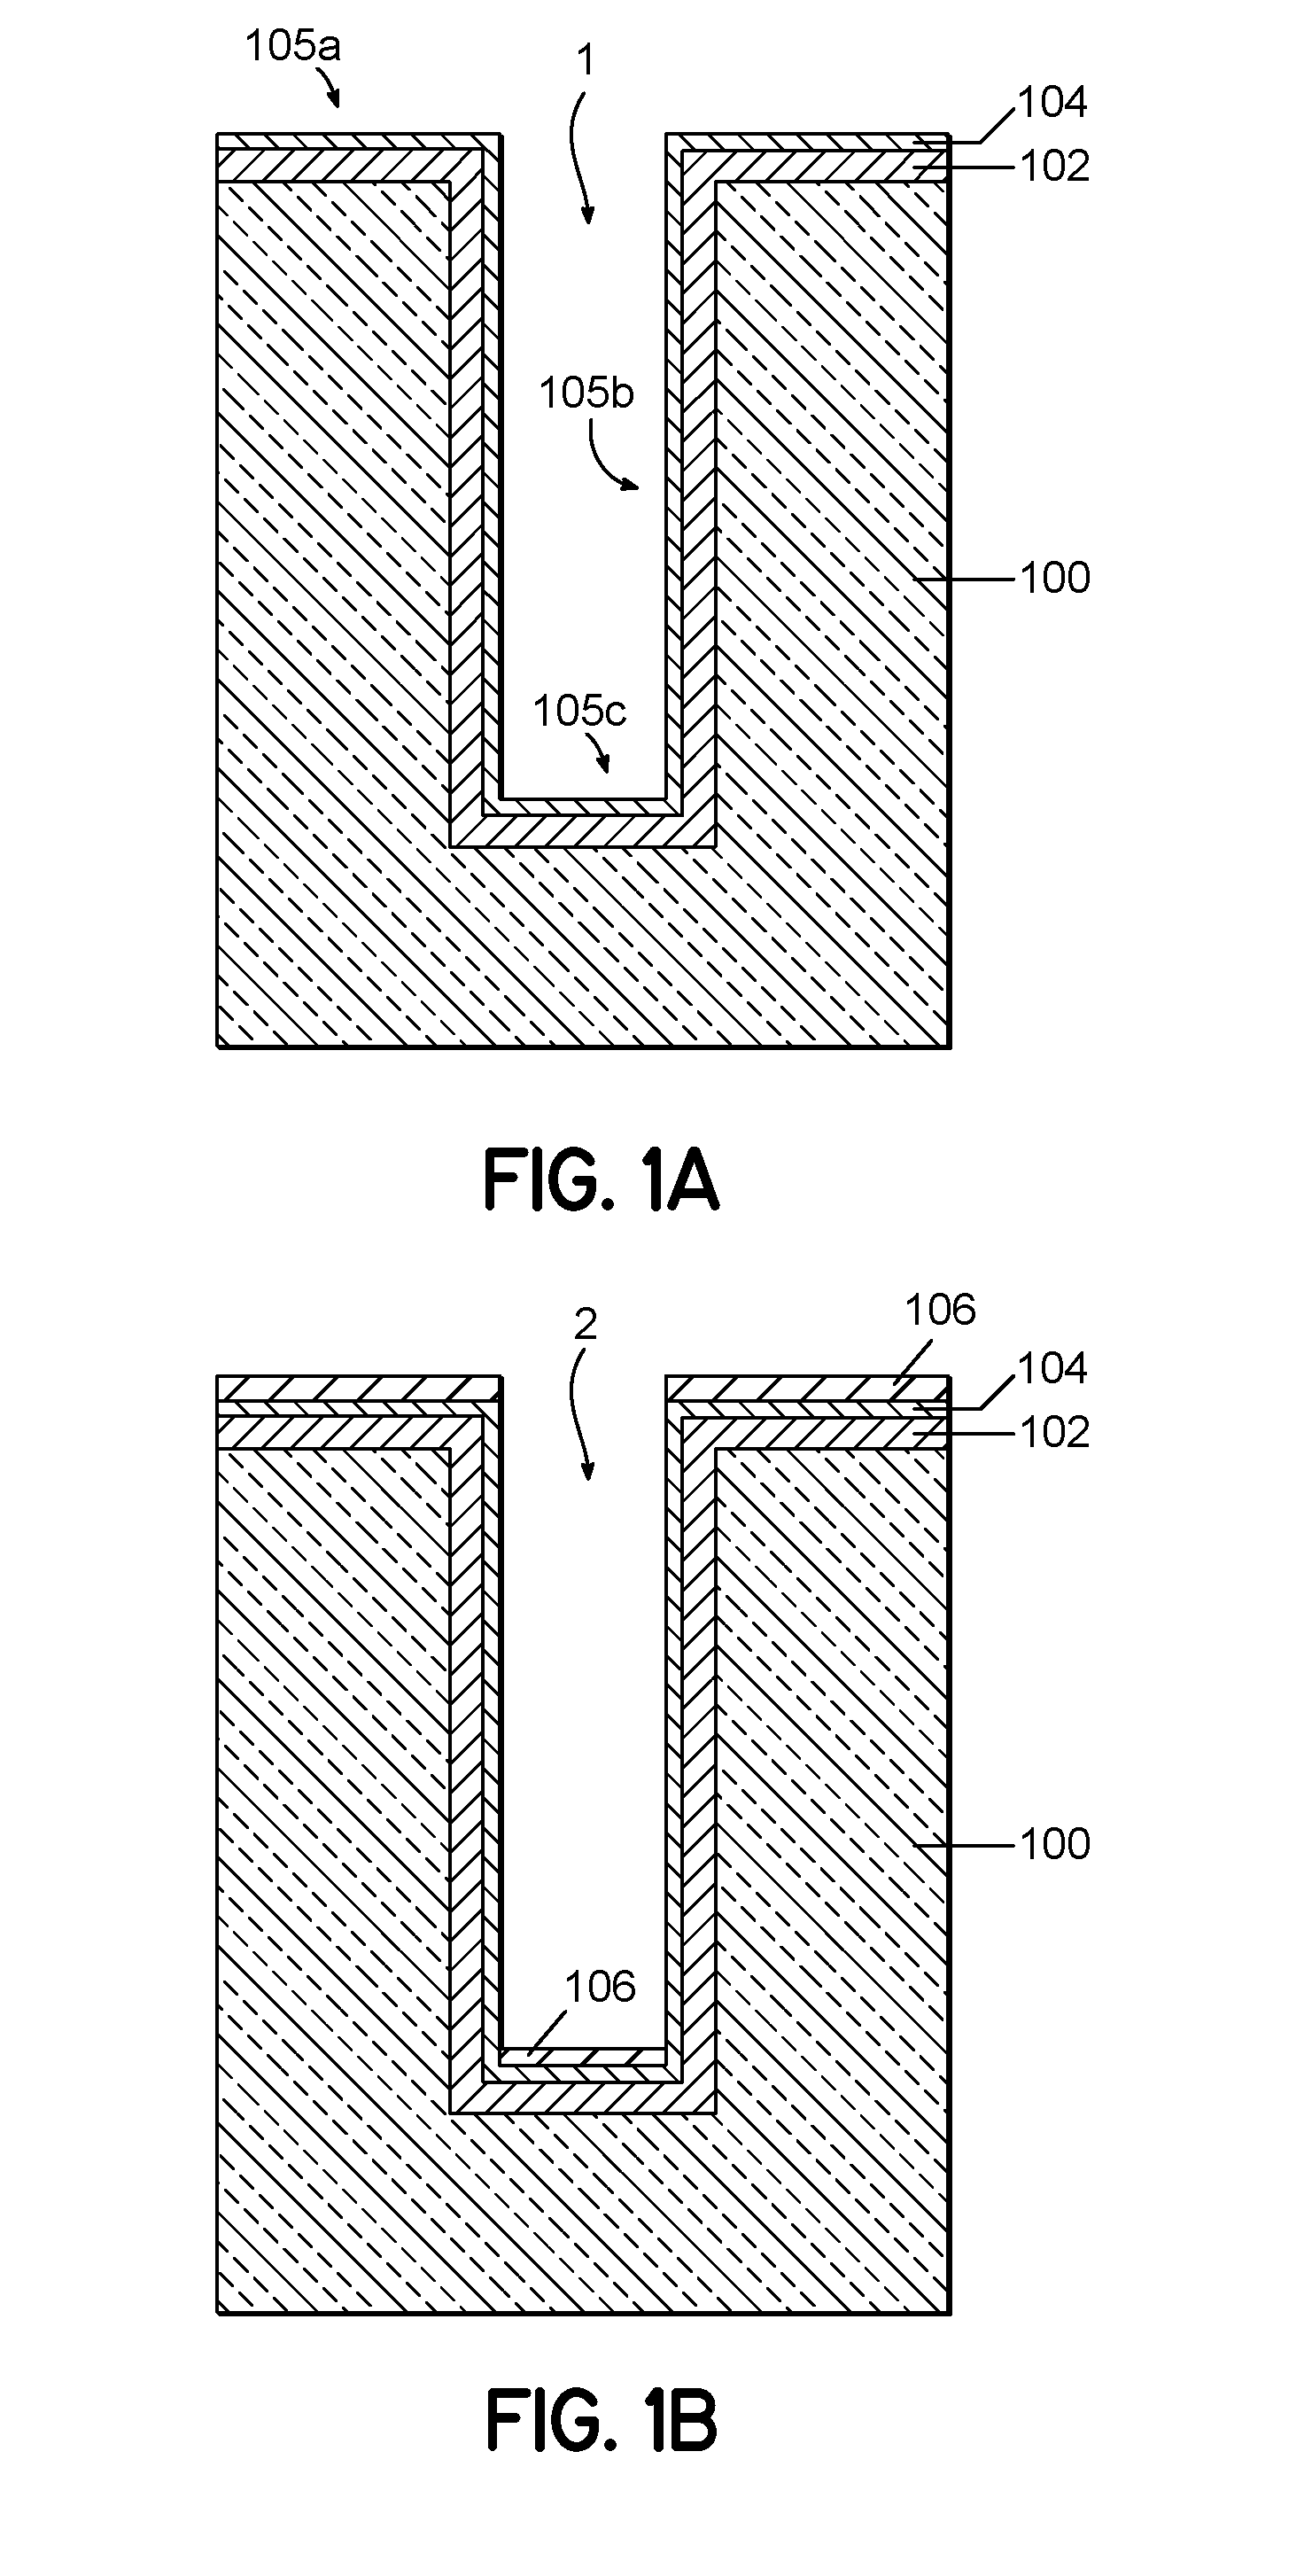 Void-free copper filling of recessed features for semiconductor devices